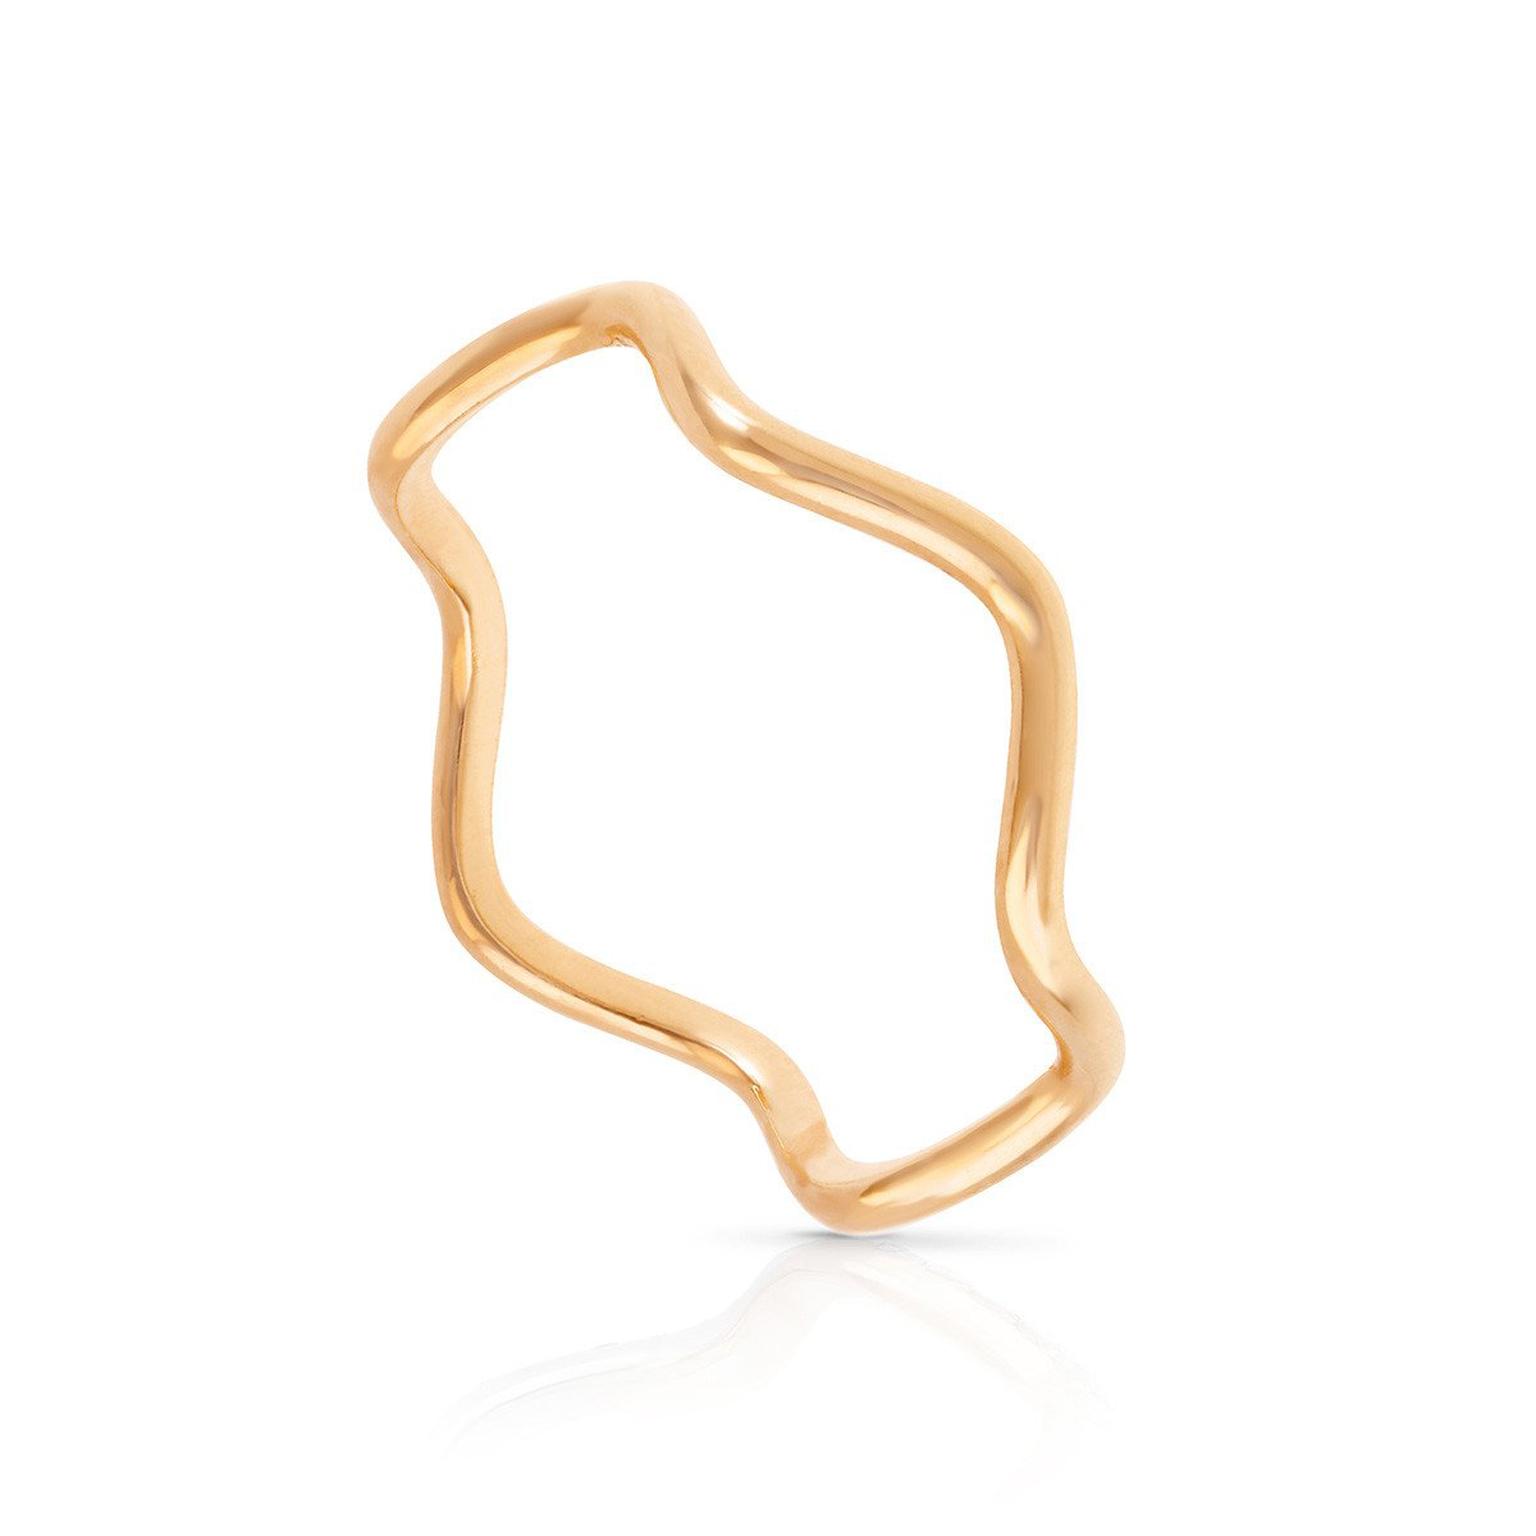 Sabine Getty Baby Memphis Wave band in rose gold